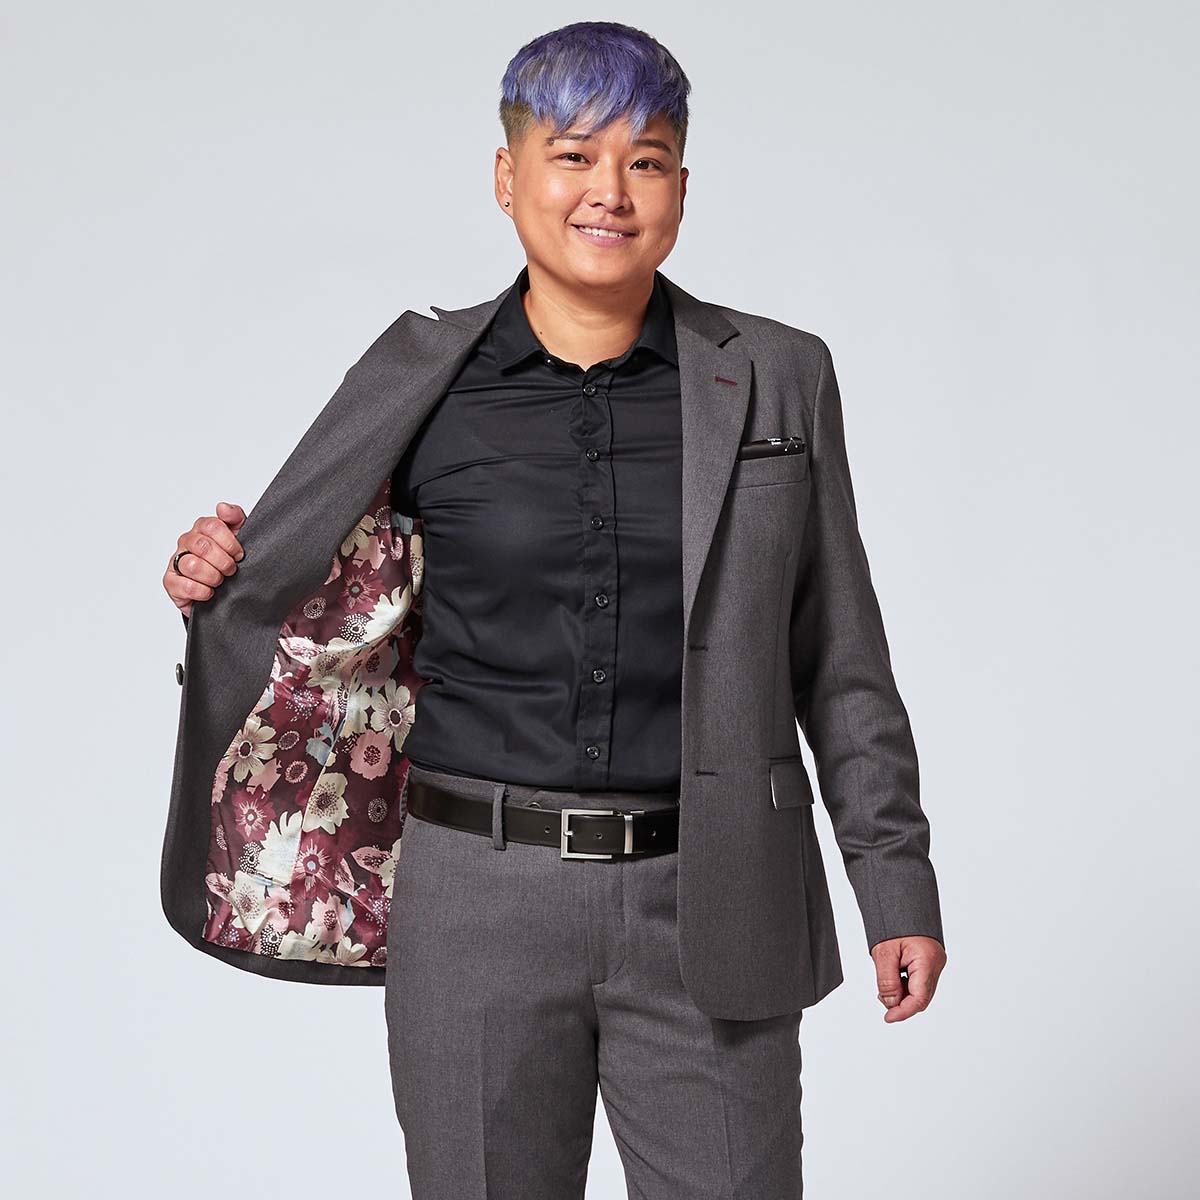 Androgynous model wearing georgie charcoal blazer, exposing colorful burgundy floral blazer lining